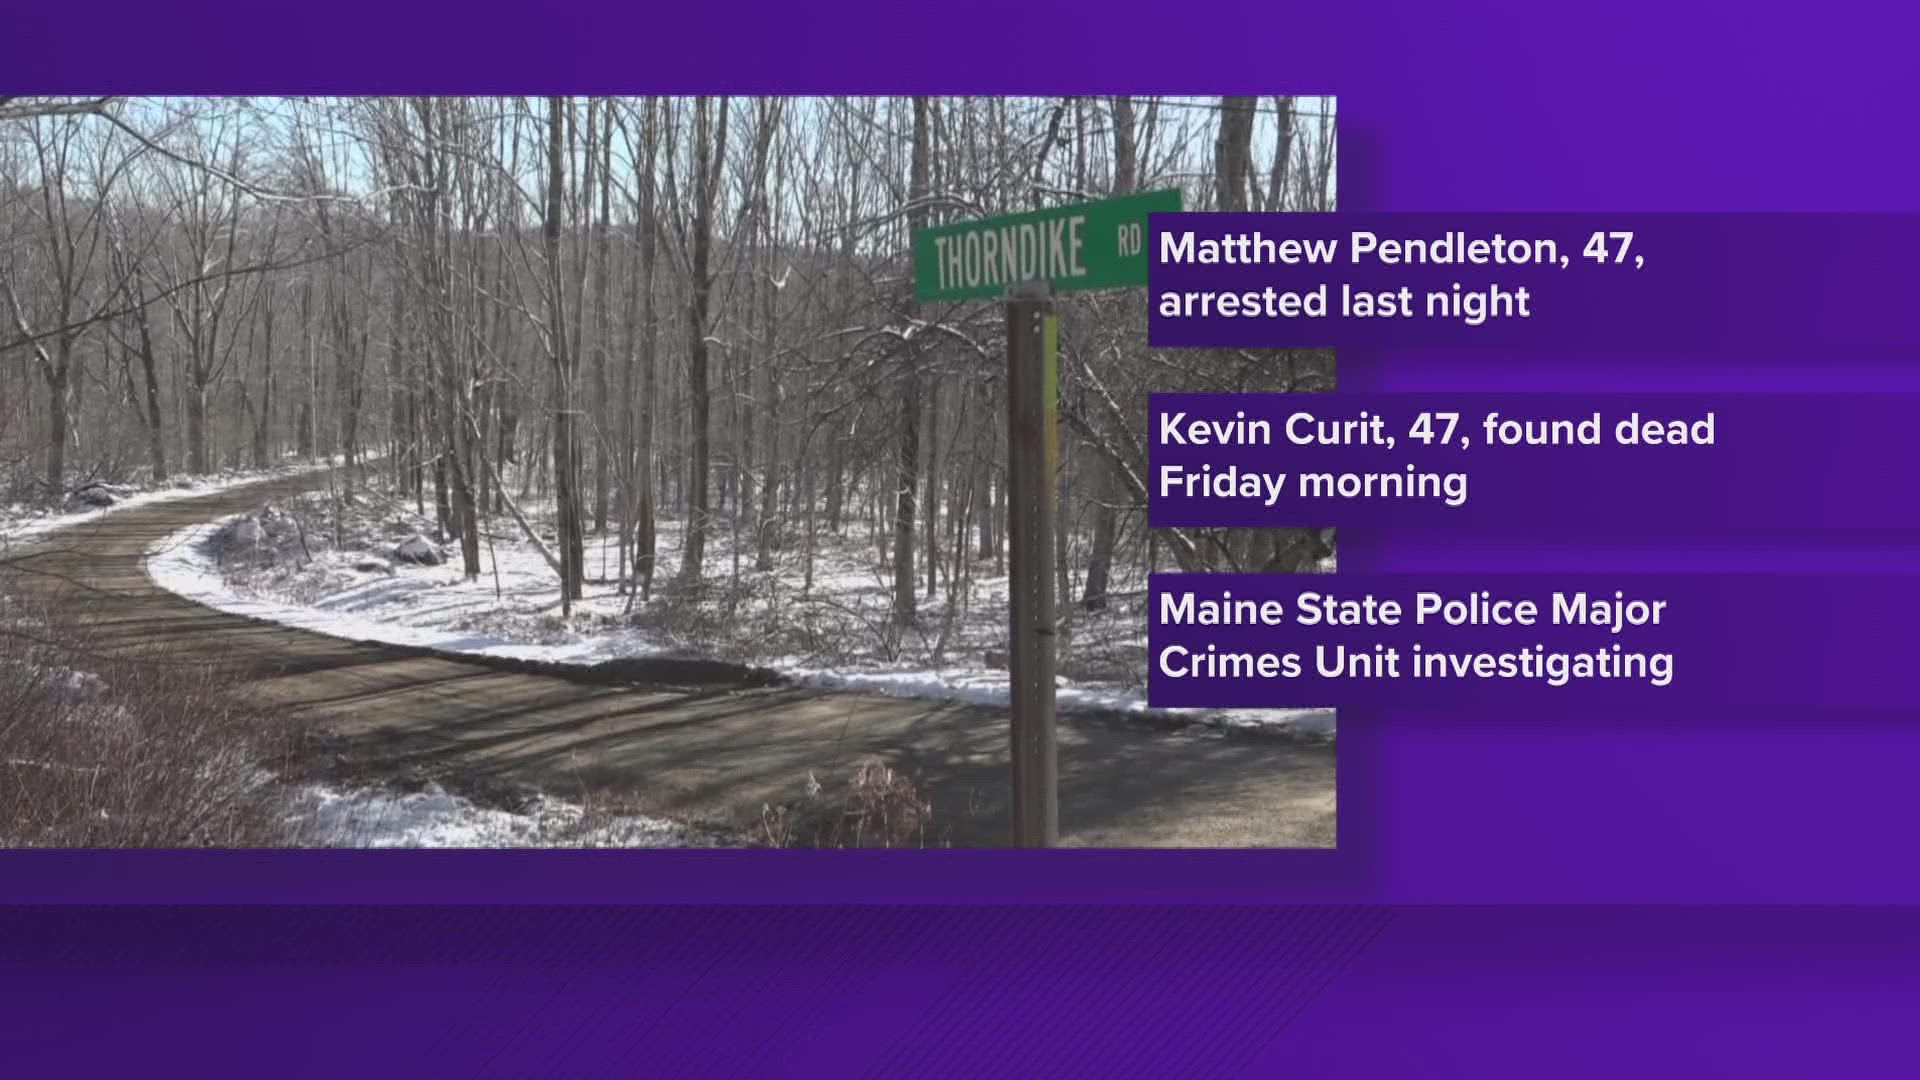 47-year-old Kevin Curit of Lincolnville was found dead by police Friday morning. Police arrested Matthew Pendleton of Linolncile in connection to his murder.